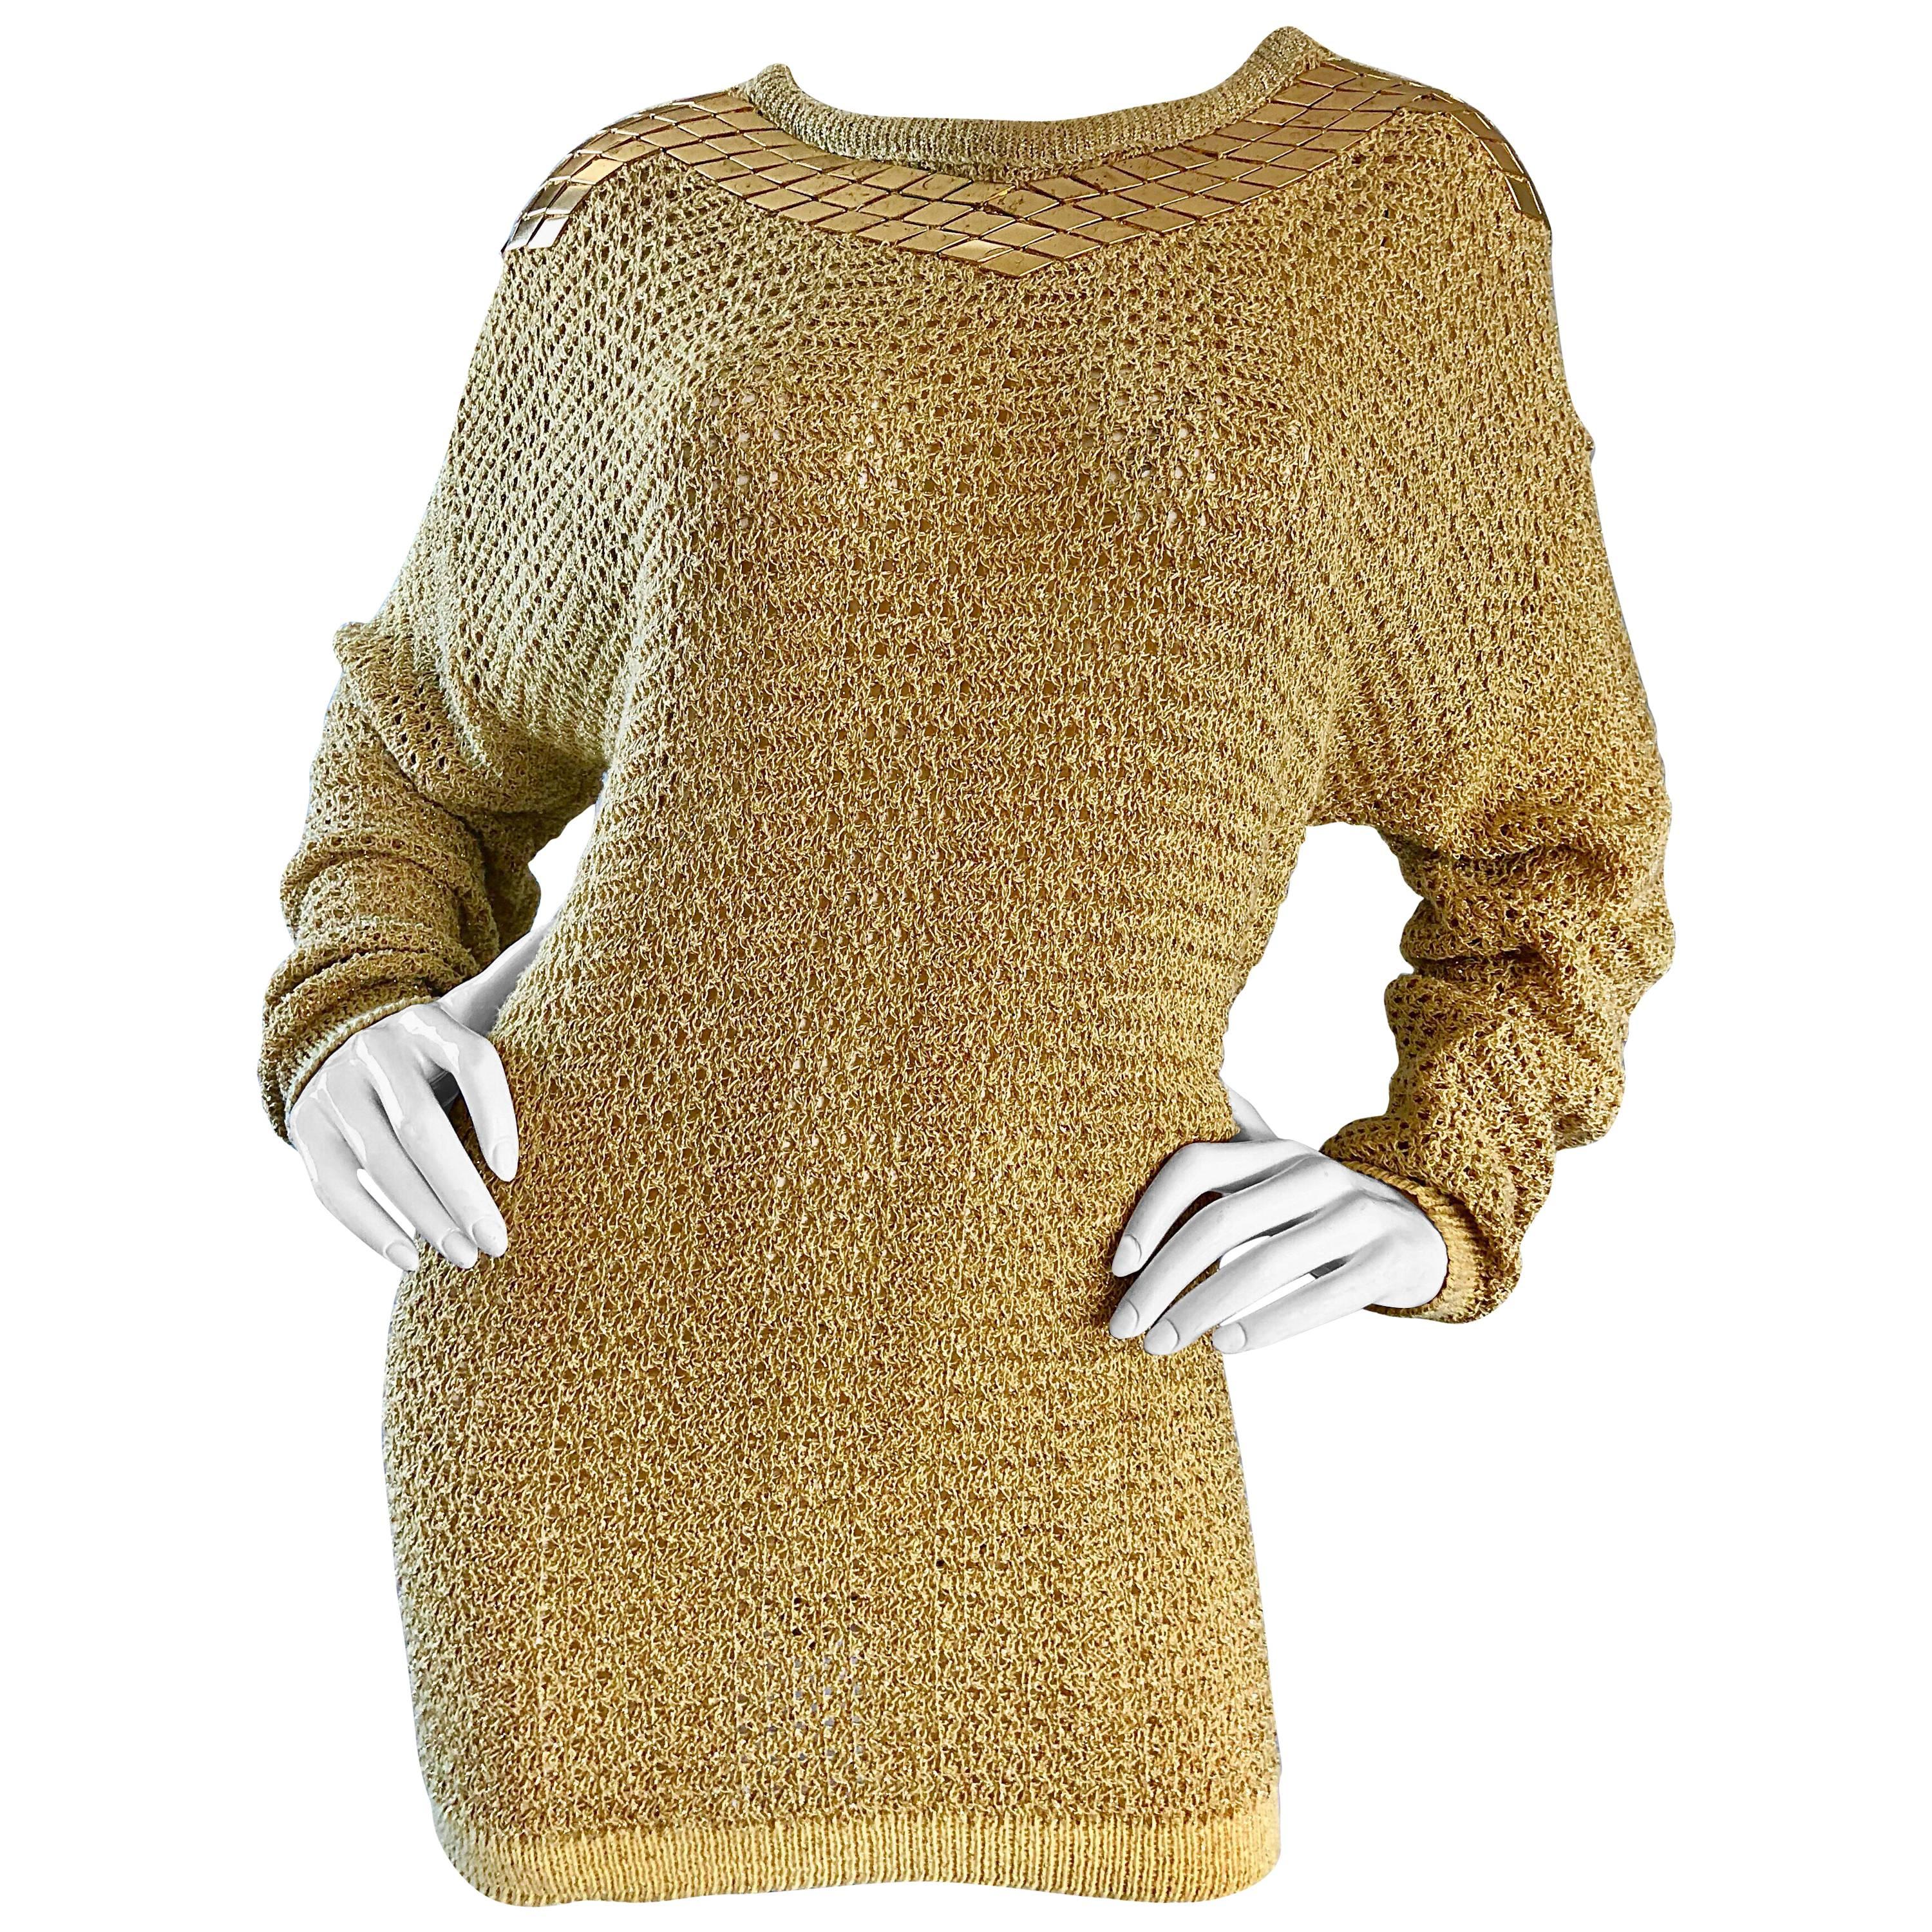 Marshall Rousso Vintage Gold Metallic Studded One Size Slouchy 1980s Sweater